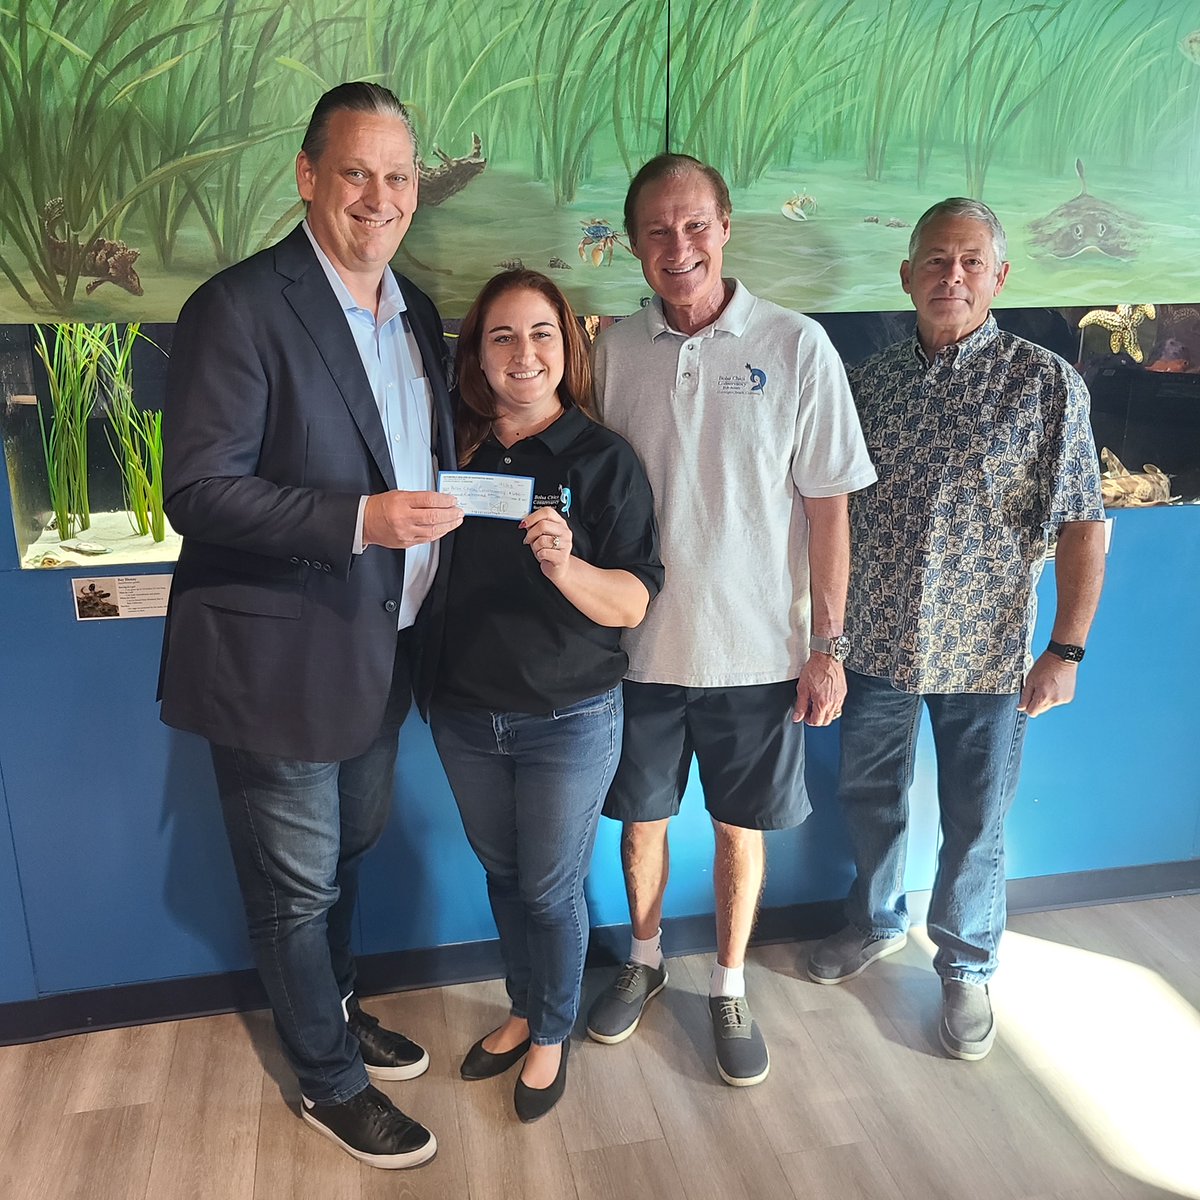 What a Gift! Thank you to City Council Member and Former Mayor Tony Strickland for recognizing the Bolsa Chica Conservancy as a beneficiary at the Huntington Beach Mayor's Ball. A total of $11,500 was delivered to us, which will support our ongoing programs. THANK YOU!